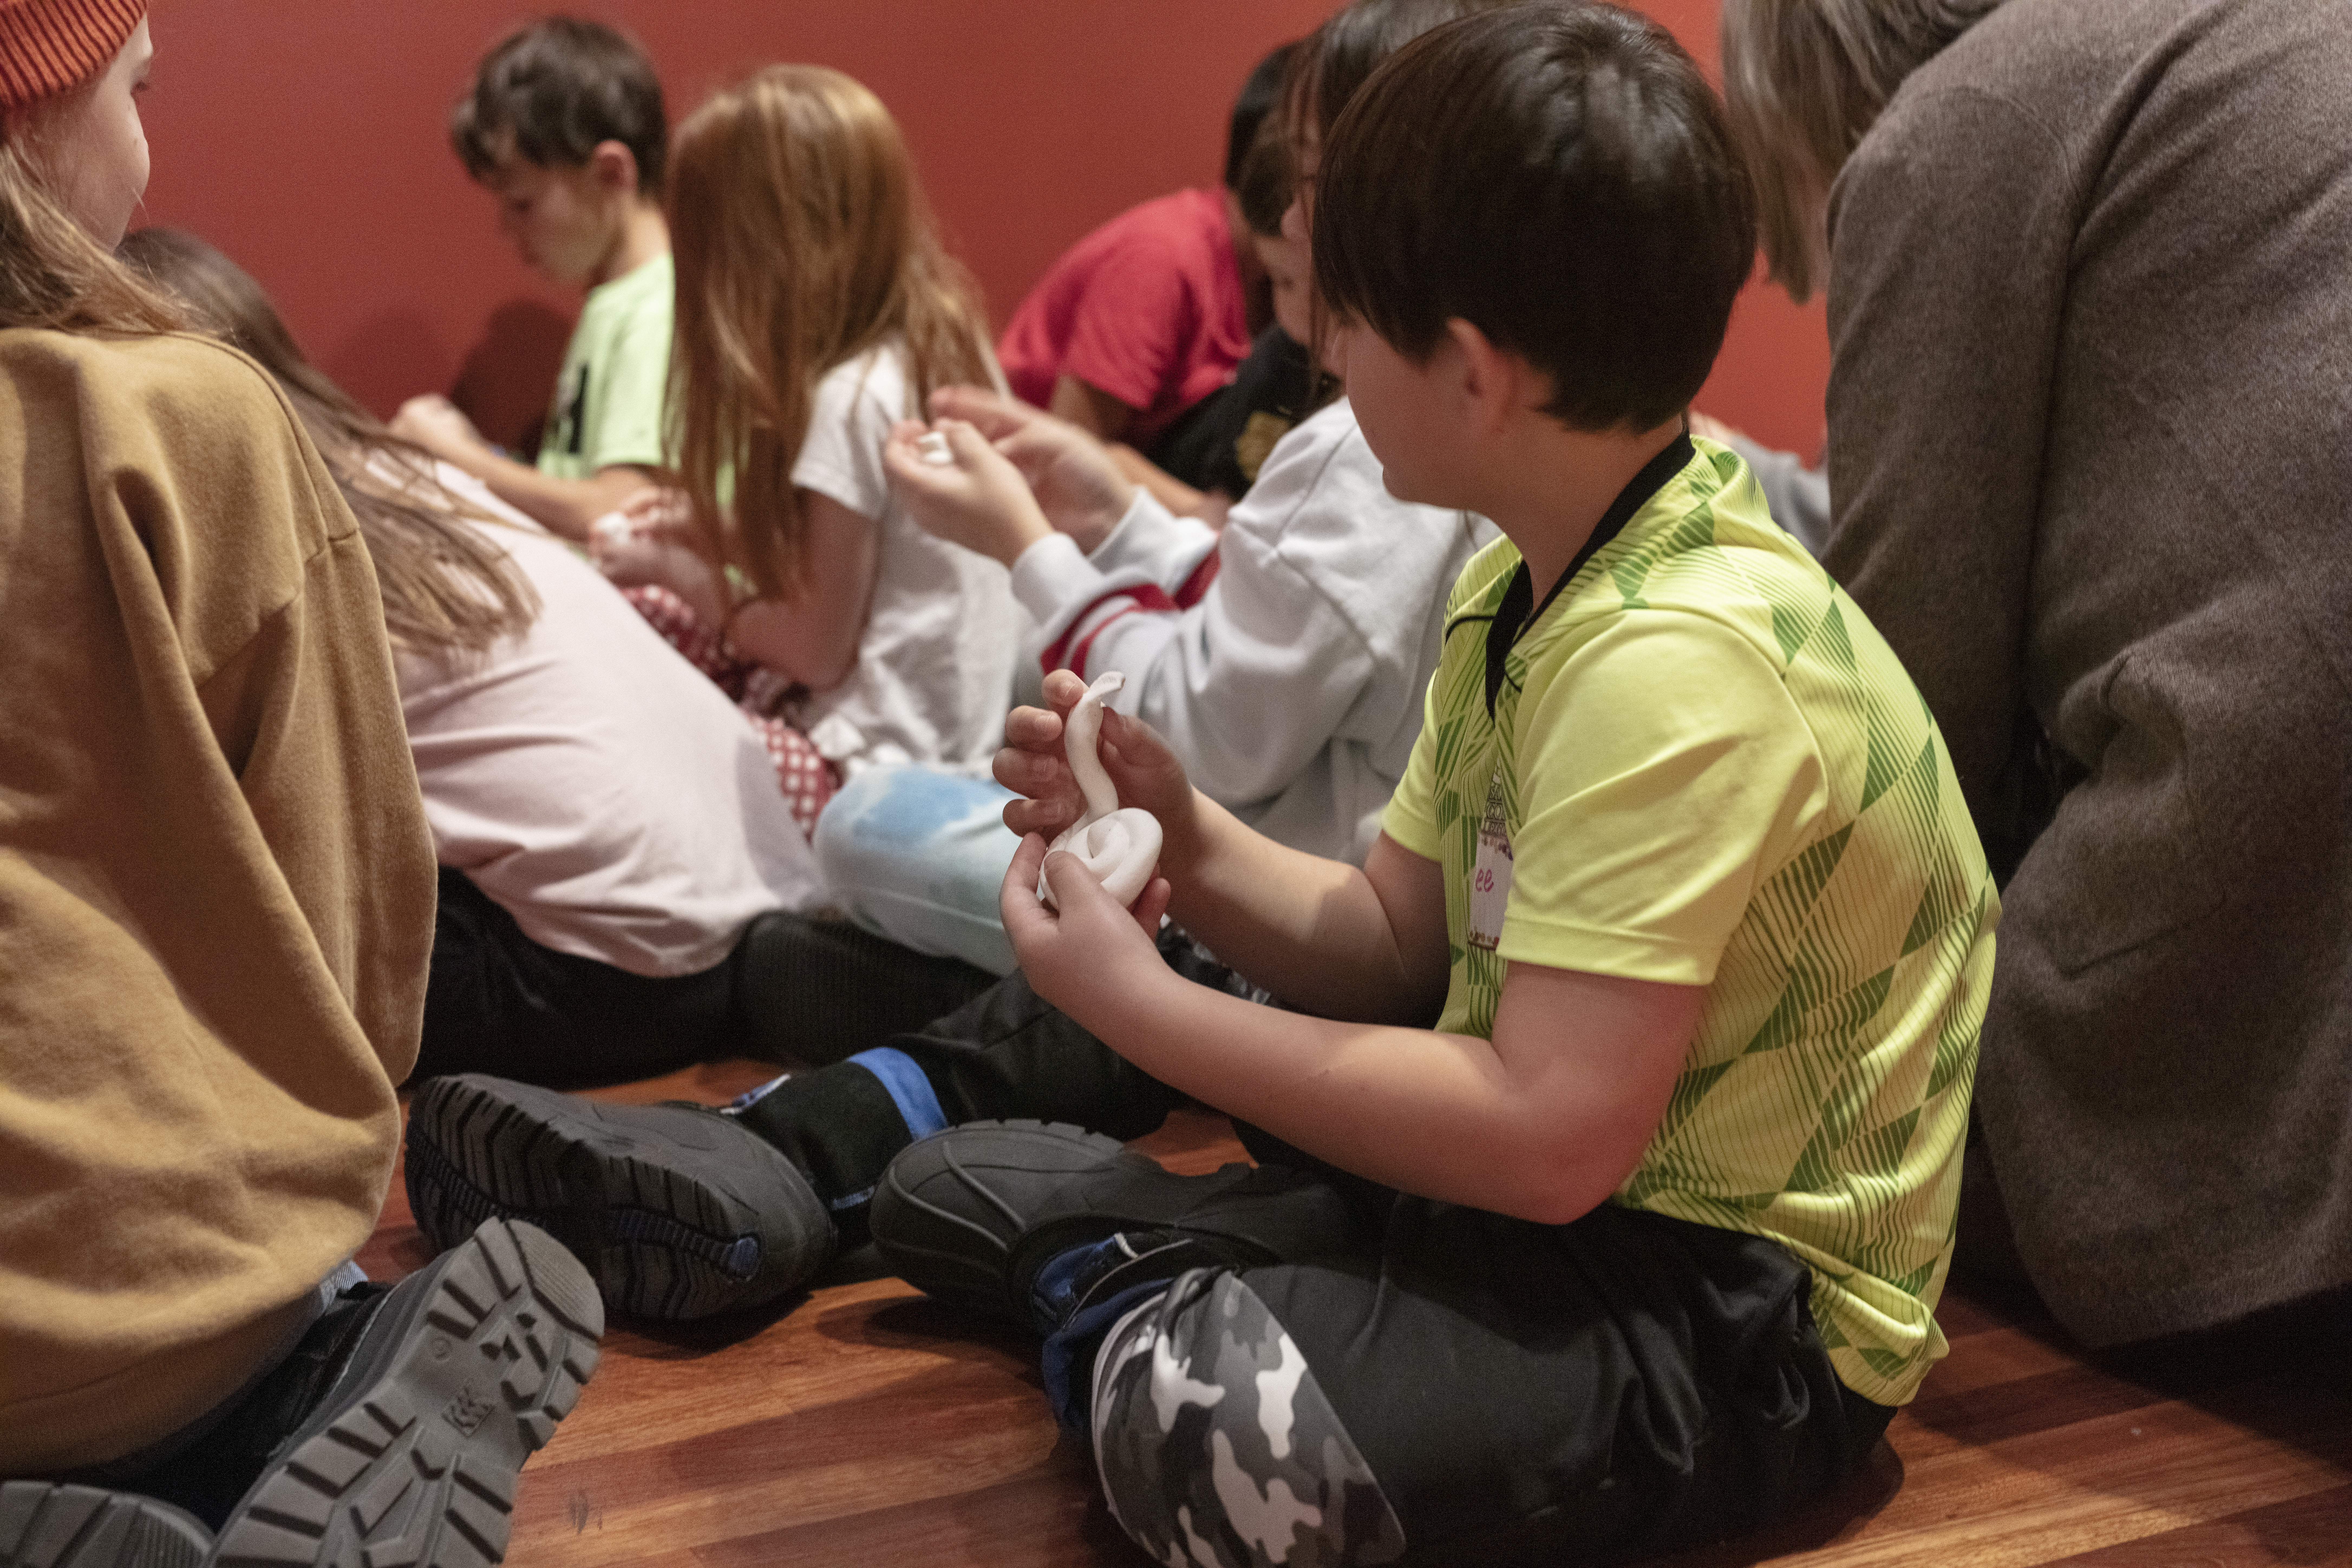 A group of children sit on the floor sculpting clay. A boy with dark hair in a green shirt holds white clay shaped like a coiled-up snake